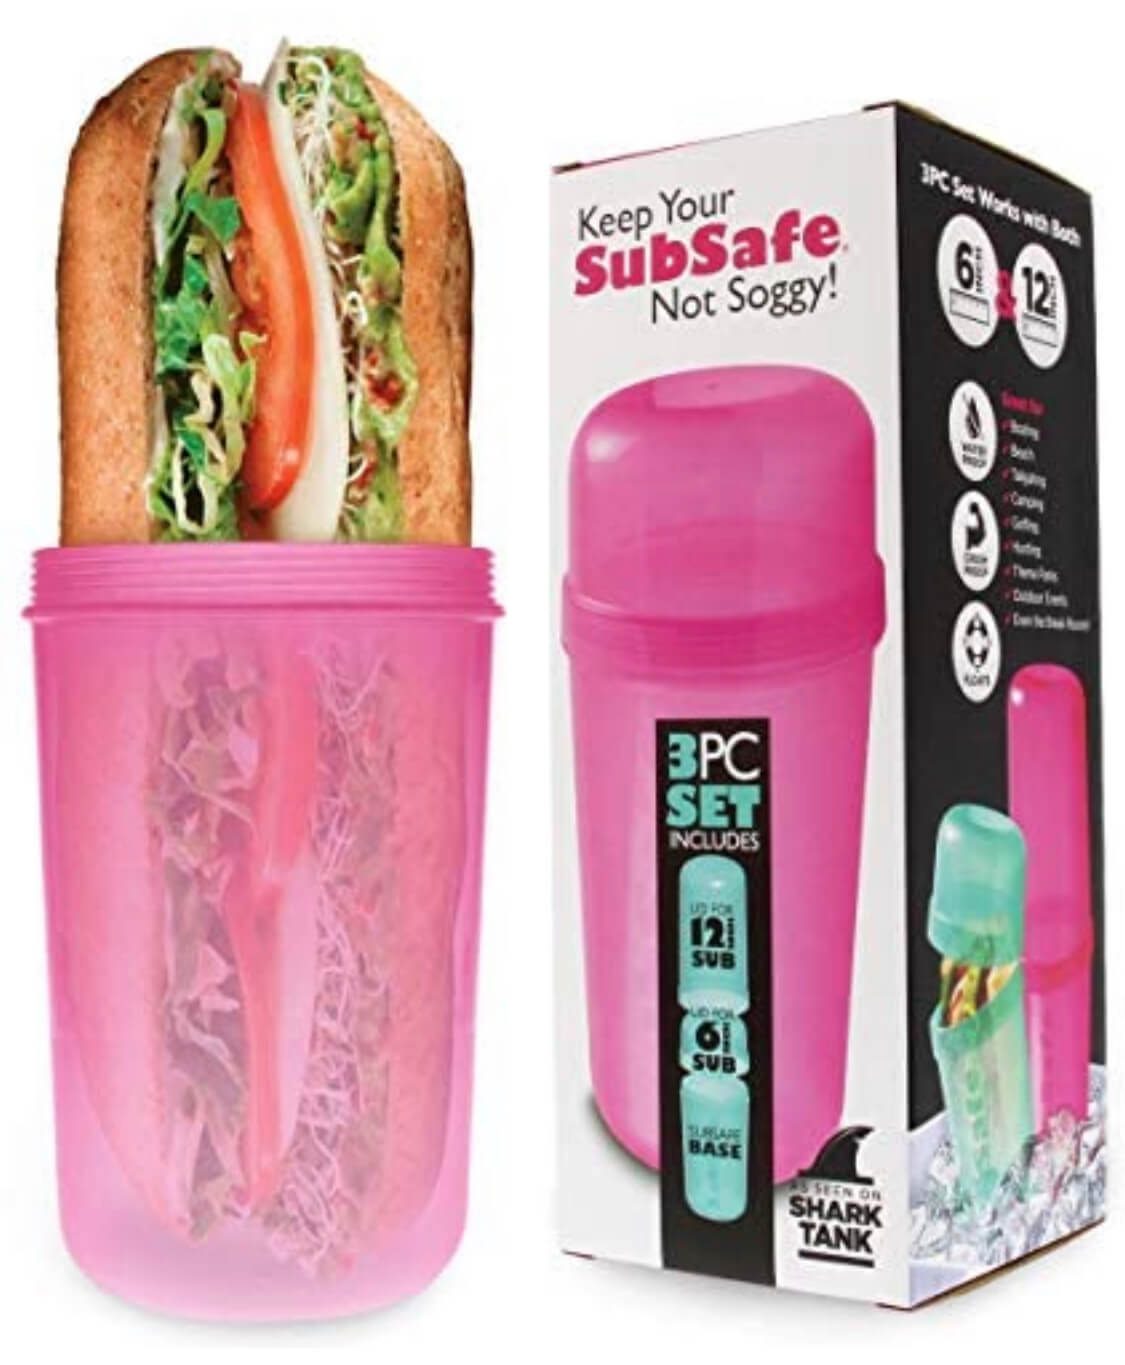 Sandwich container